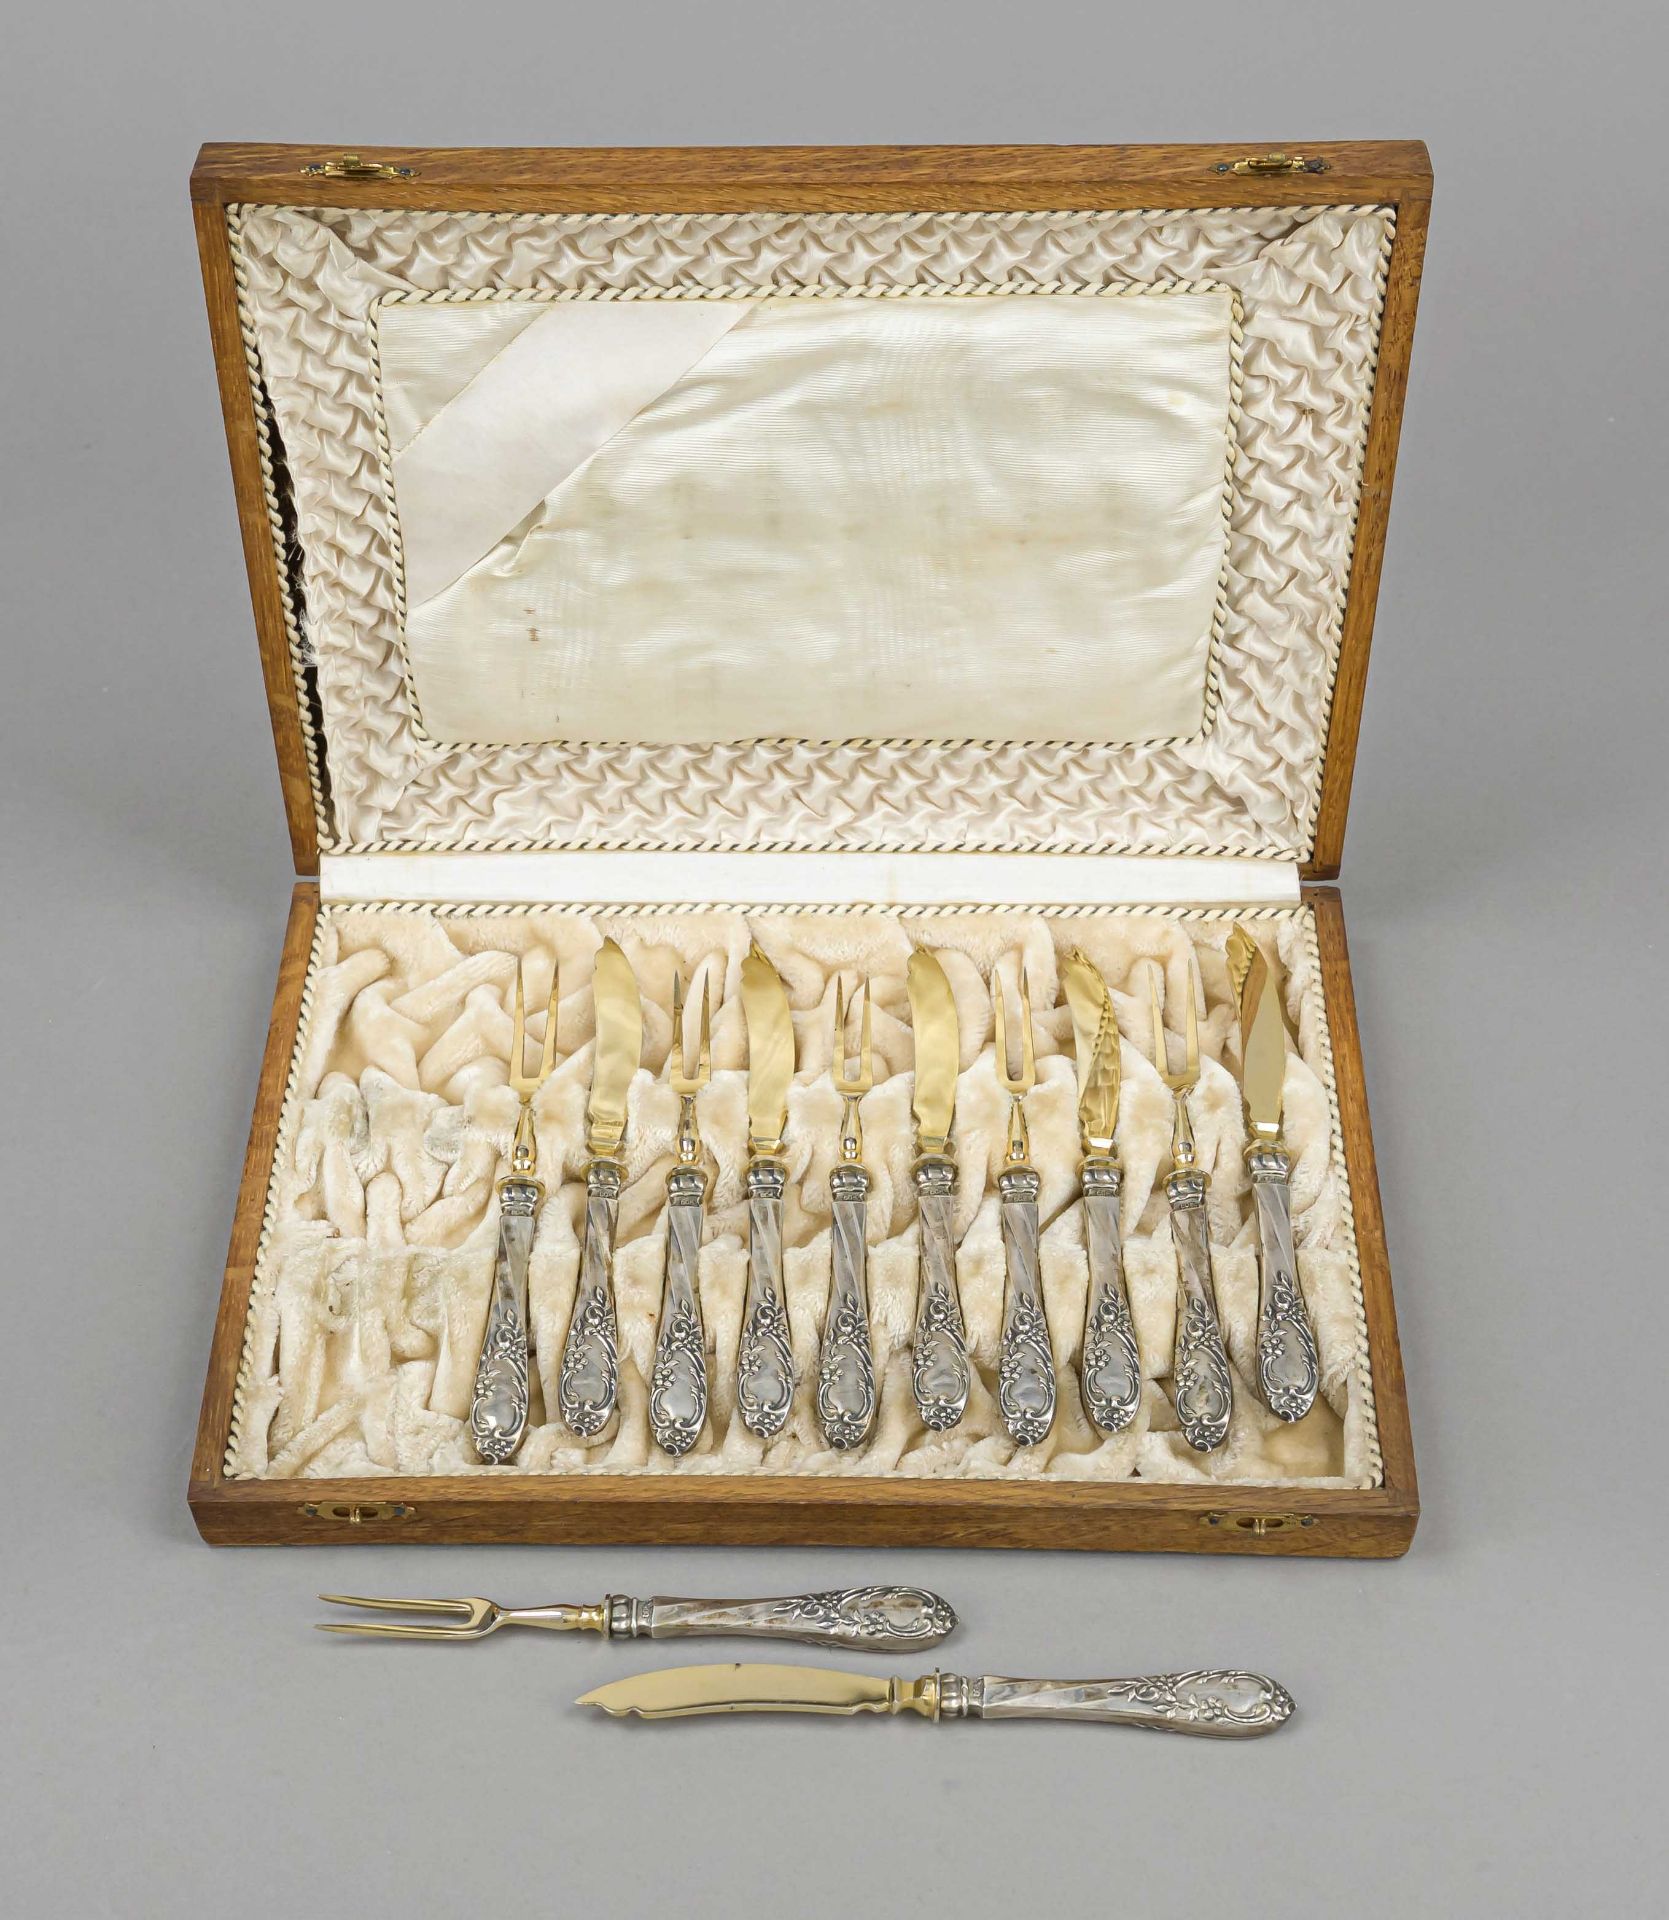 Fruit cutlery for six persons, 20th century, silver 800/000, filled handles with floral relief